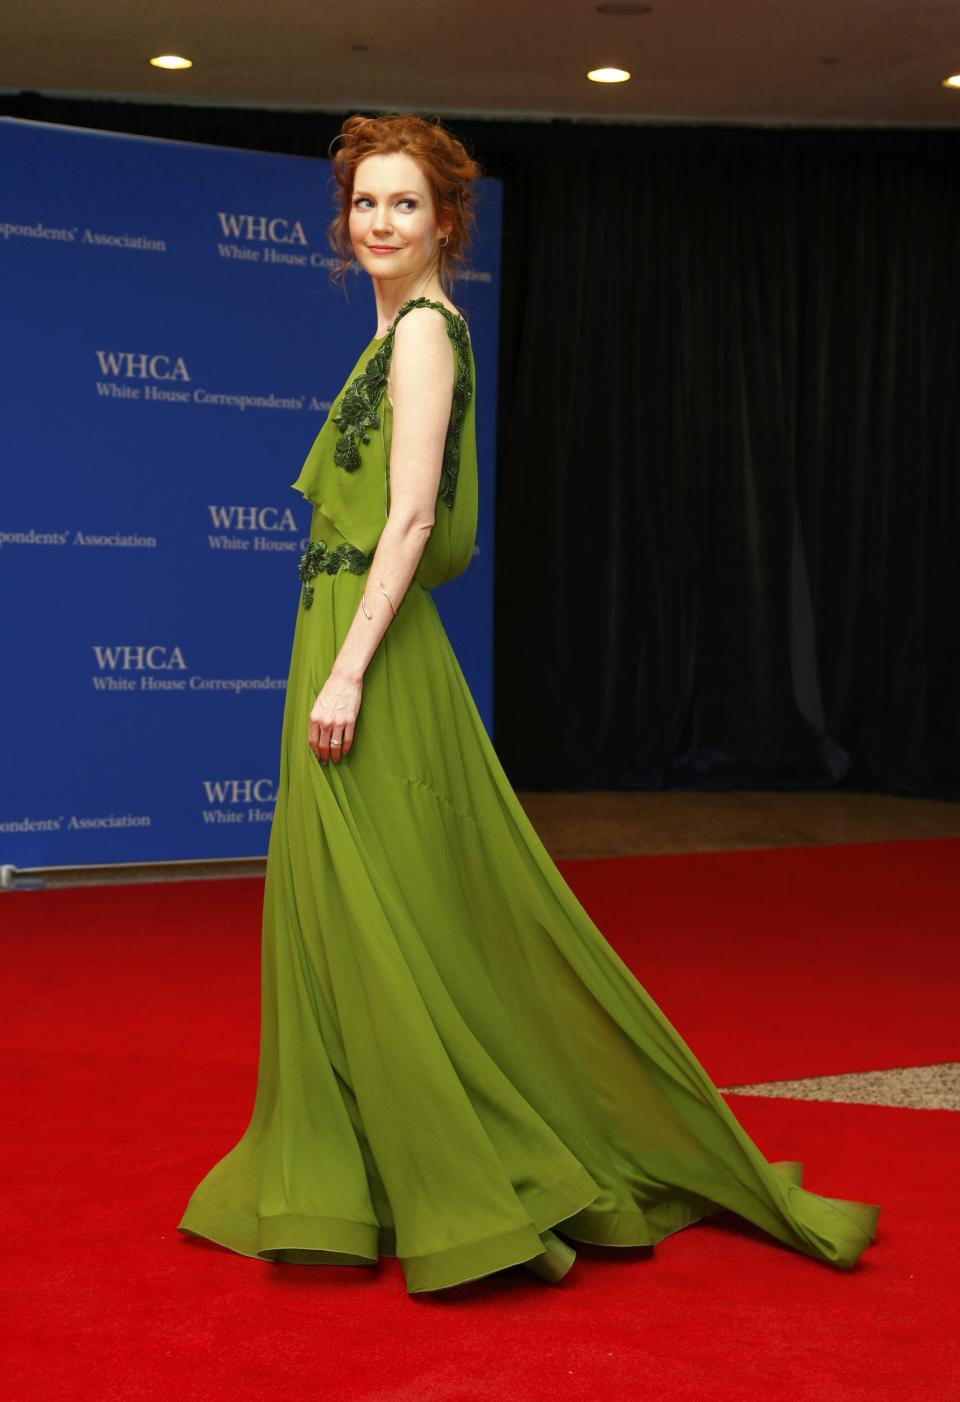 Actress Darby Stanchfield arrives on the red carpet at the annual White House Correspondents' Association Dinner in Washington, May 3, 2014. (REUTERS/Jonathan Ernst)